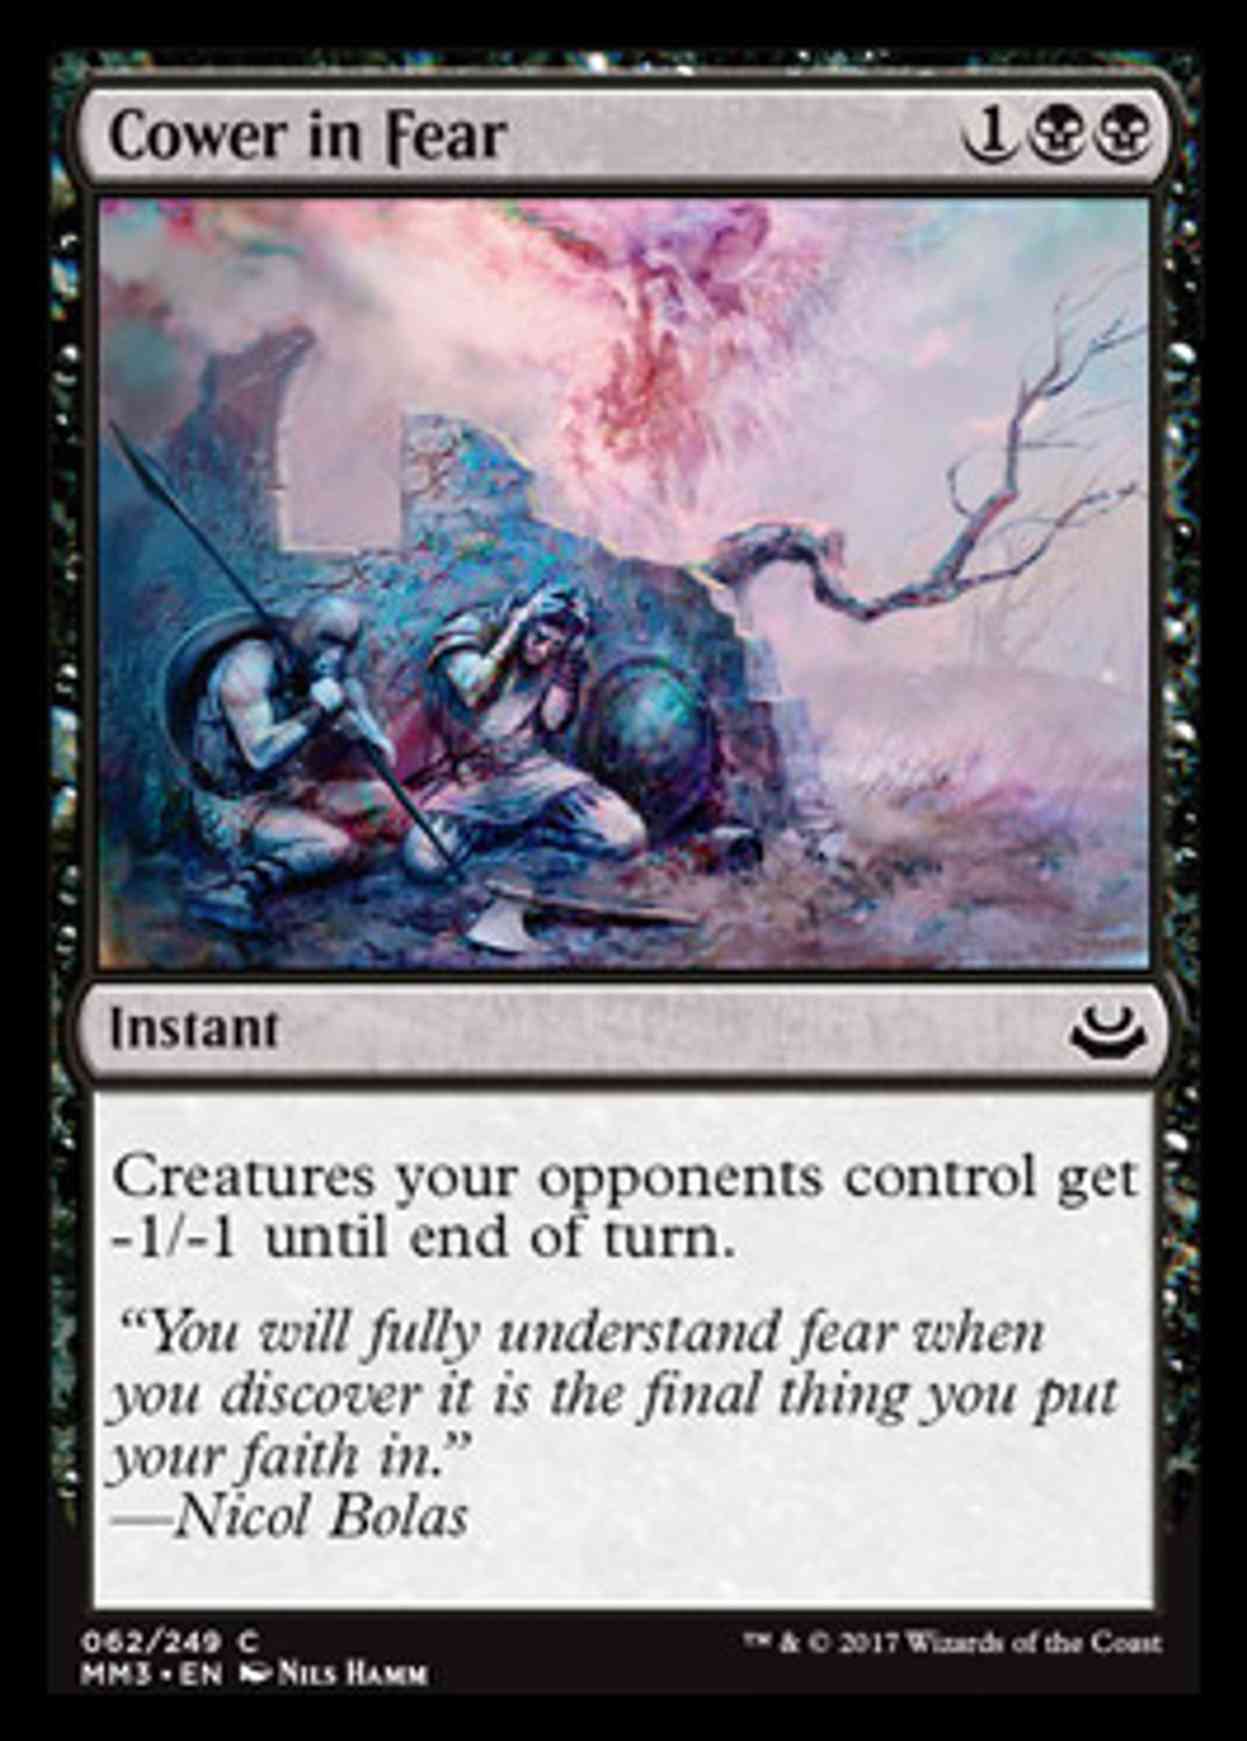 Cower in Fear magic card front